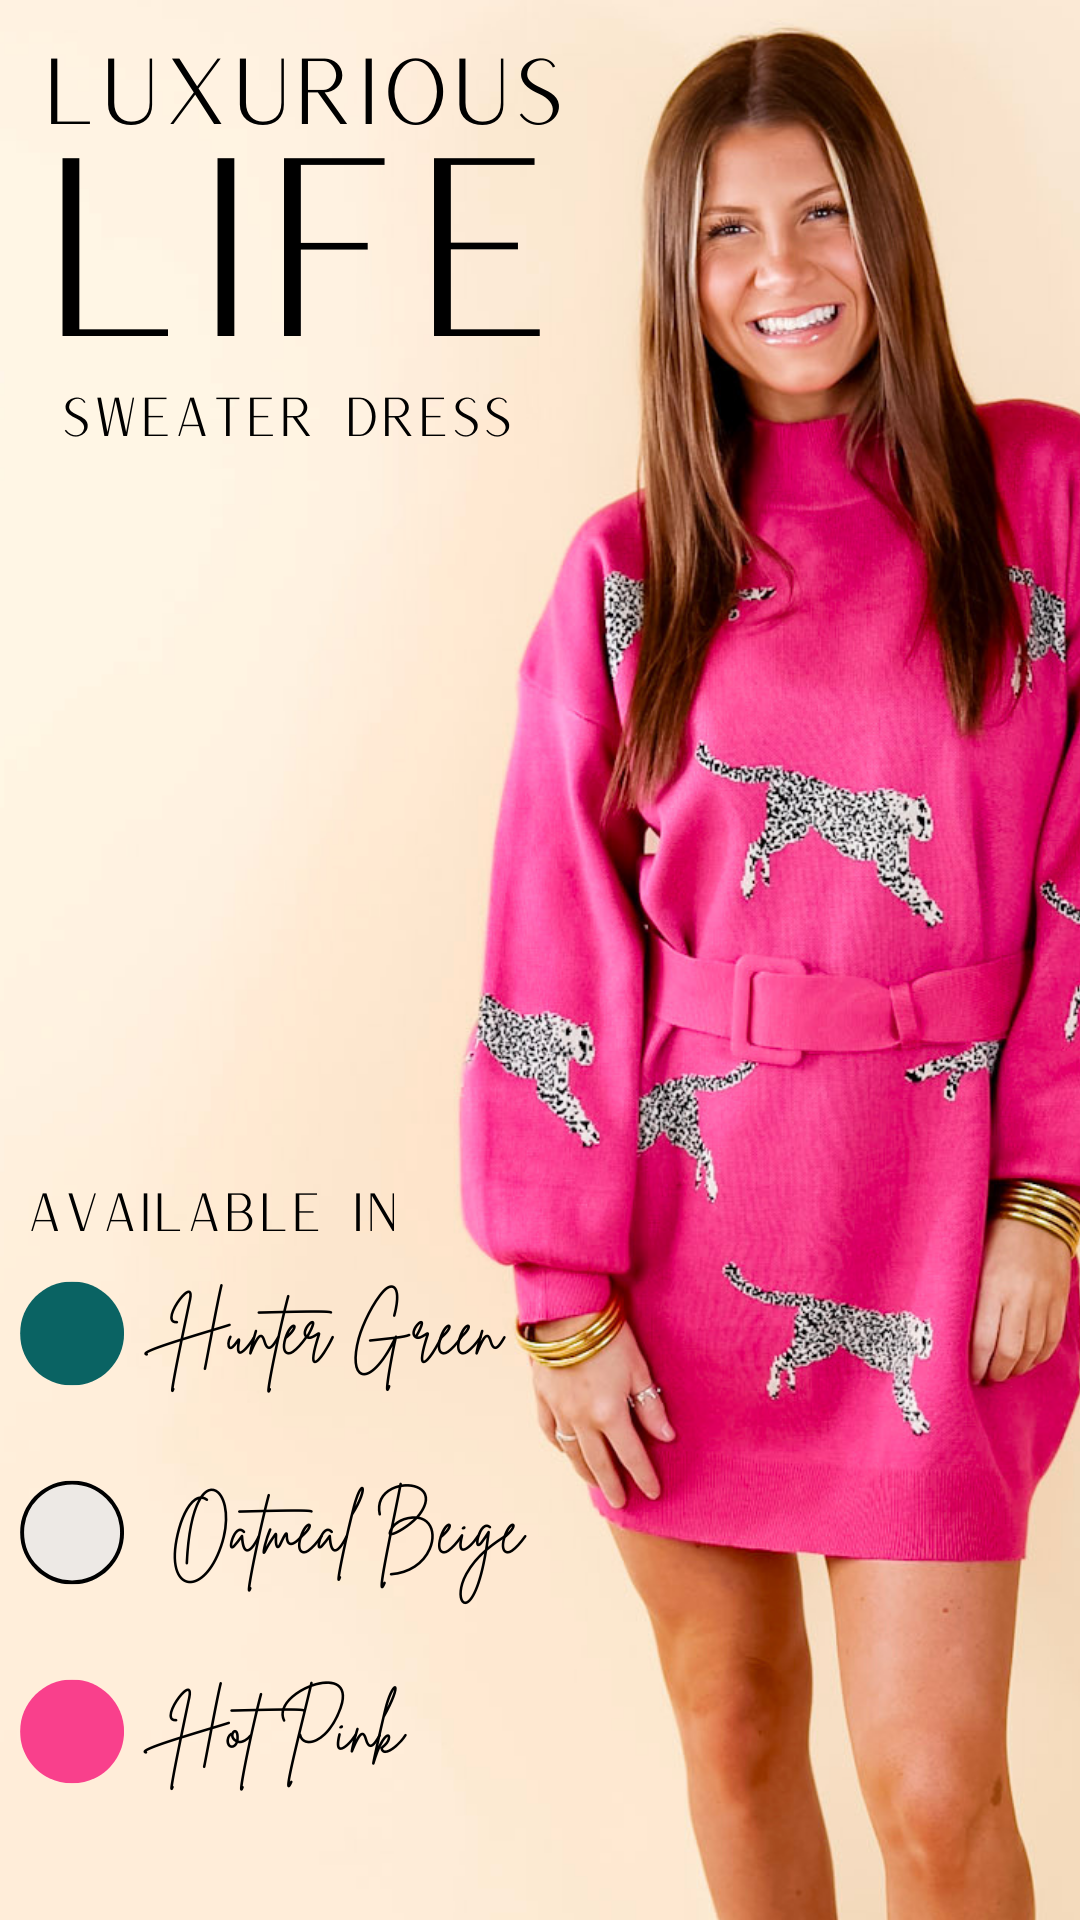 Luxurious Life Animal Print Sweater Dress with Belt in Hot Pink - Giddy Up Glamour Boutique